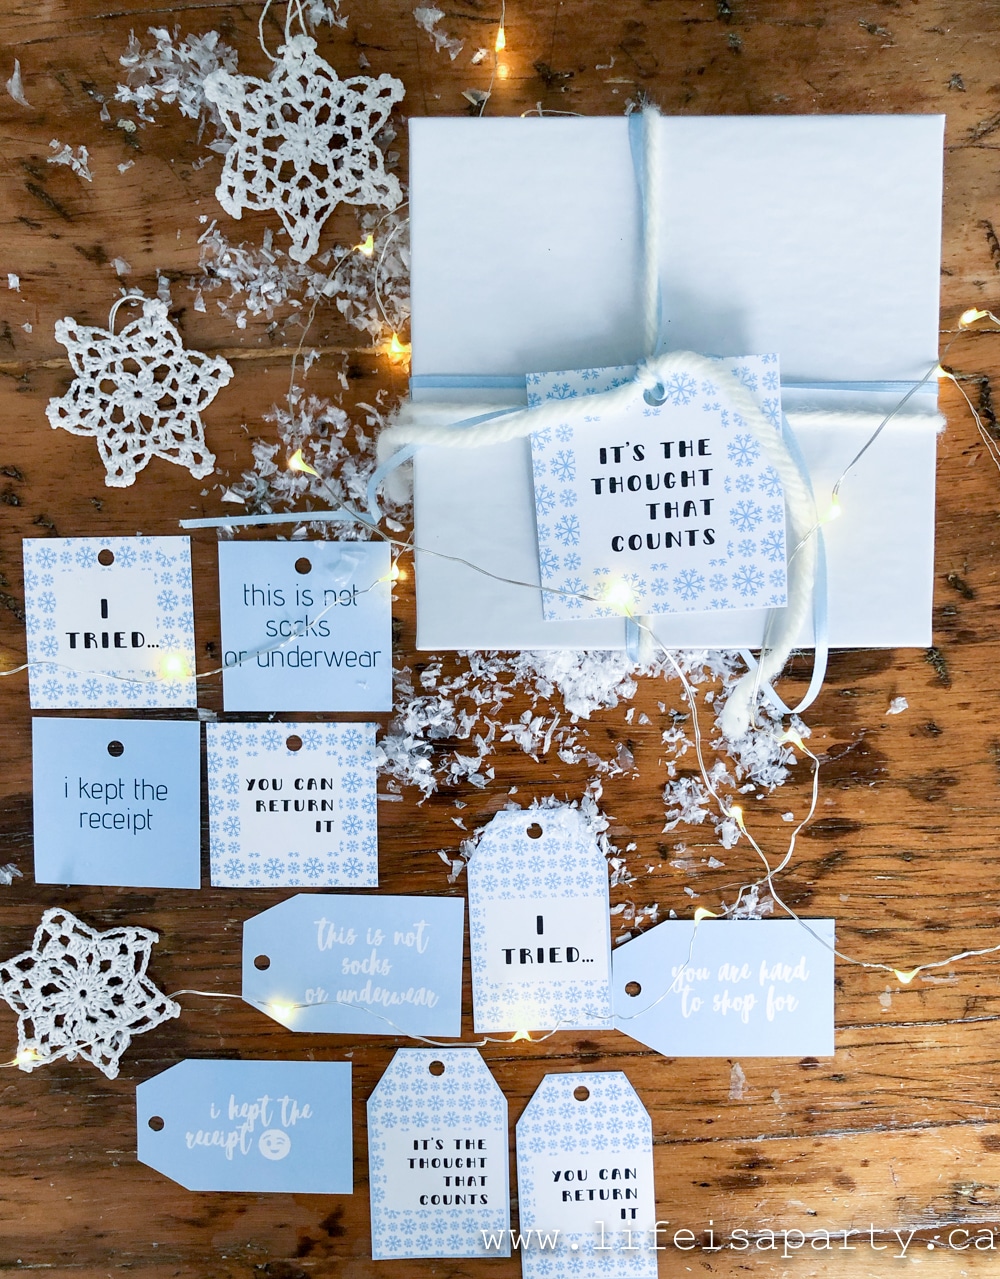 Printable Christmas Gift Tags: these funny Christmas tags come in blue, black and white, red and green, or a colourful muliti-color set.